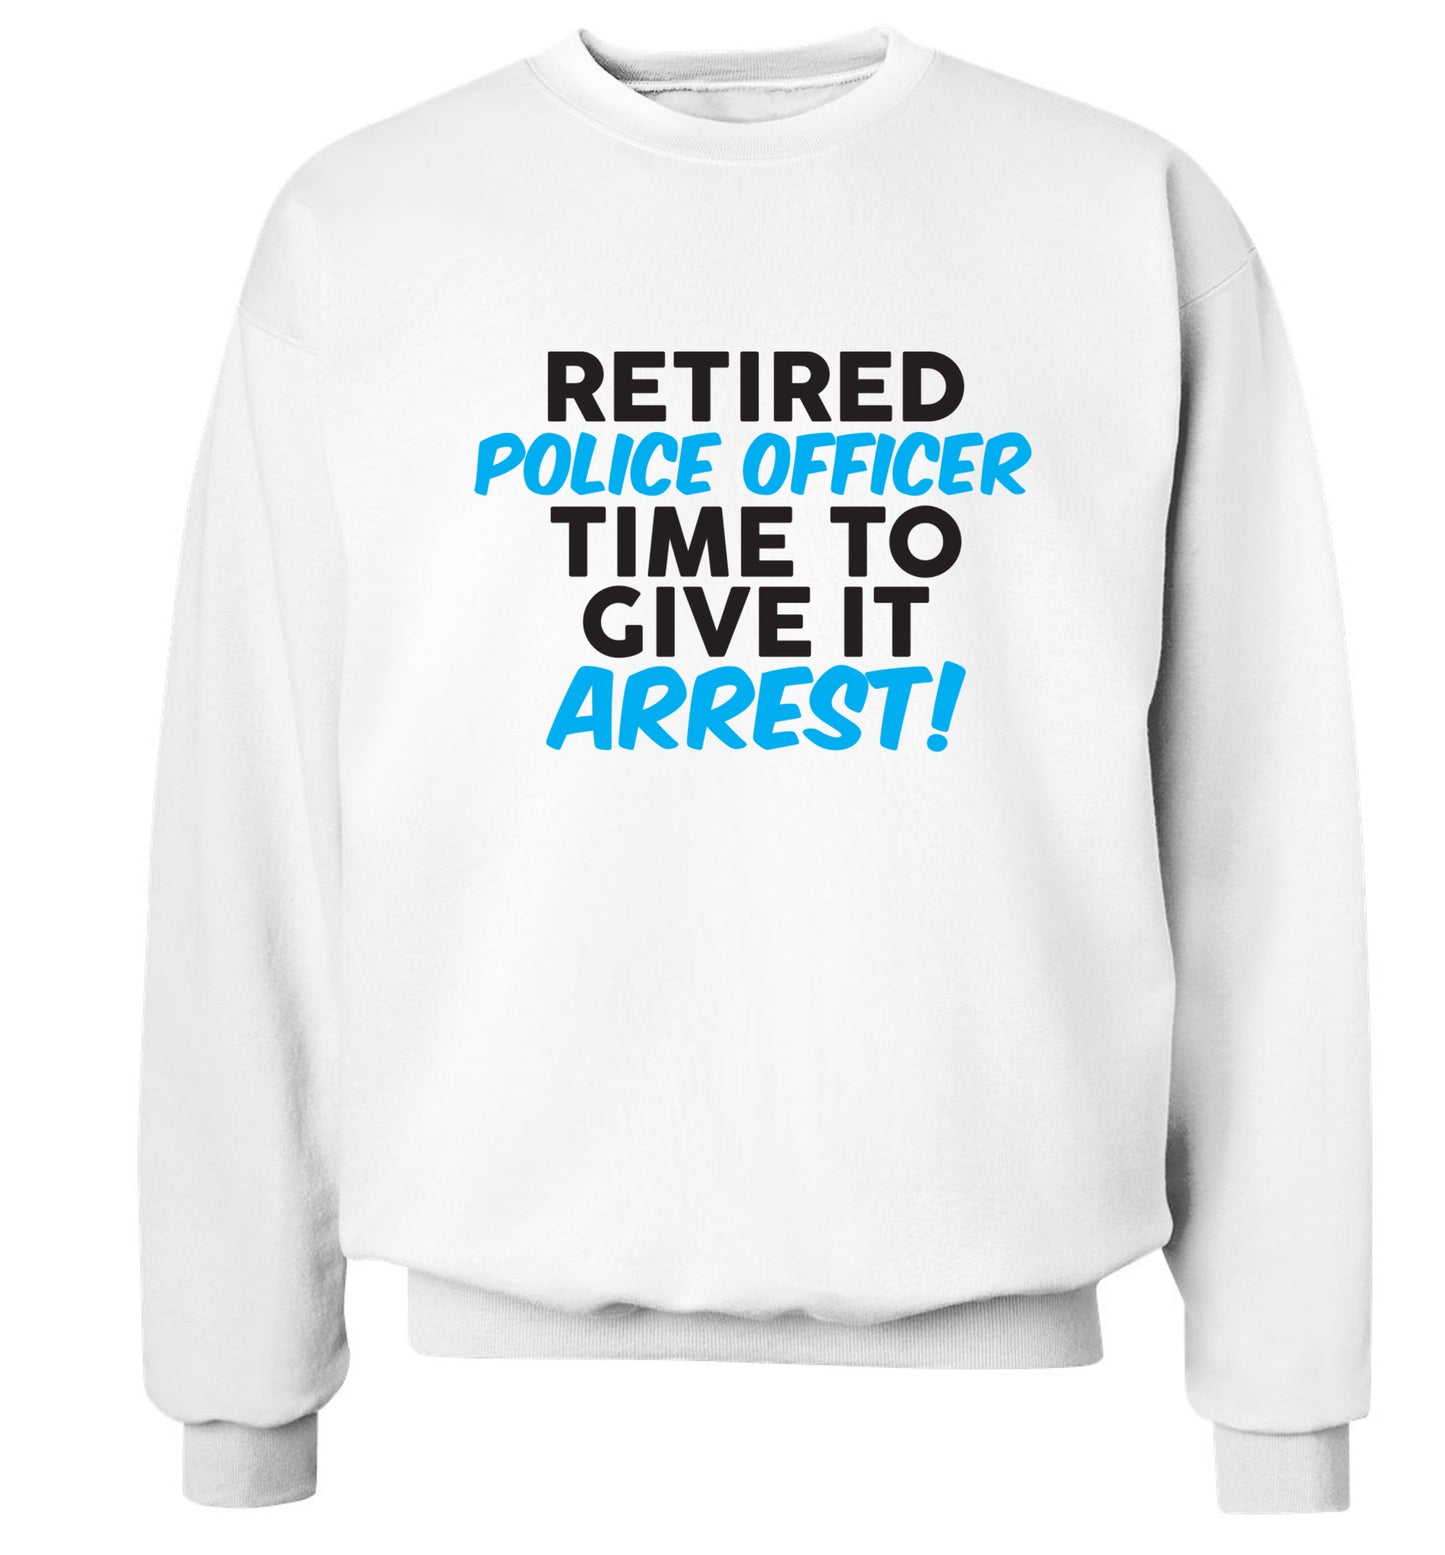 Retired police officer time to give it arrest Adult's unisex white Sweater 2XL